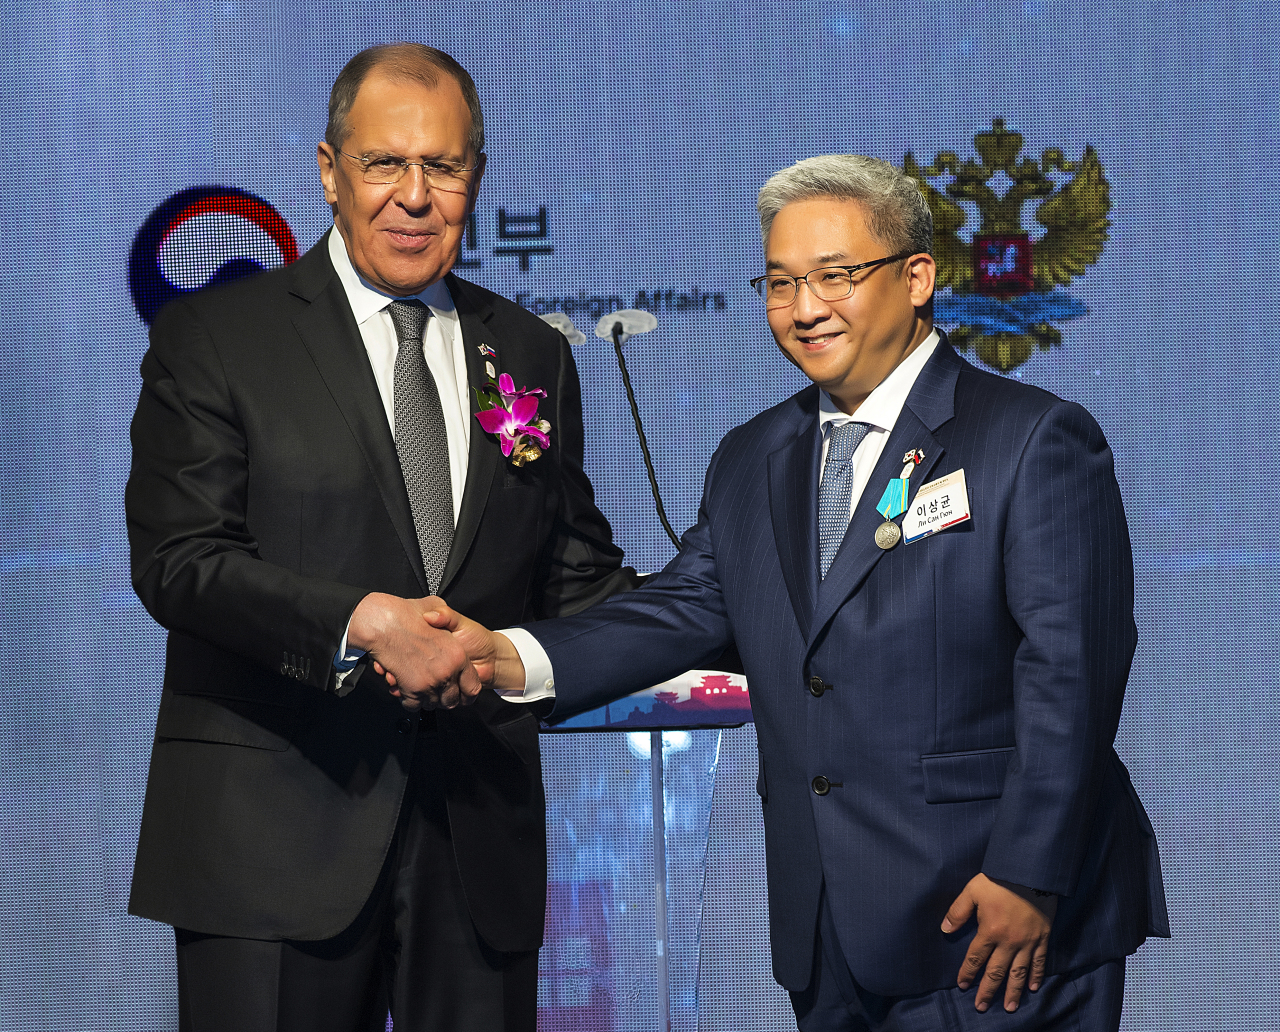 Korea-Russia Arts and Culture Society President Lee Sang Kyun (right) poses for photo with Russian Foreign Minister Sergey Lavrov (left) after receiving the Pushkin Medal during the opening ceremony for the Year of Mutual Exchange between South Korea and Russia on Wednesday. (Seoul Cyber University)